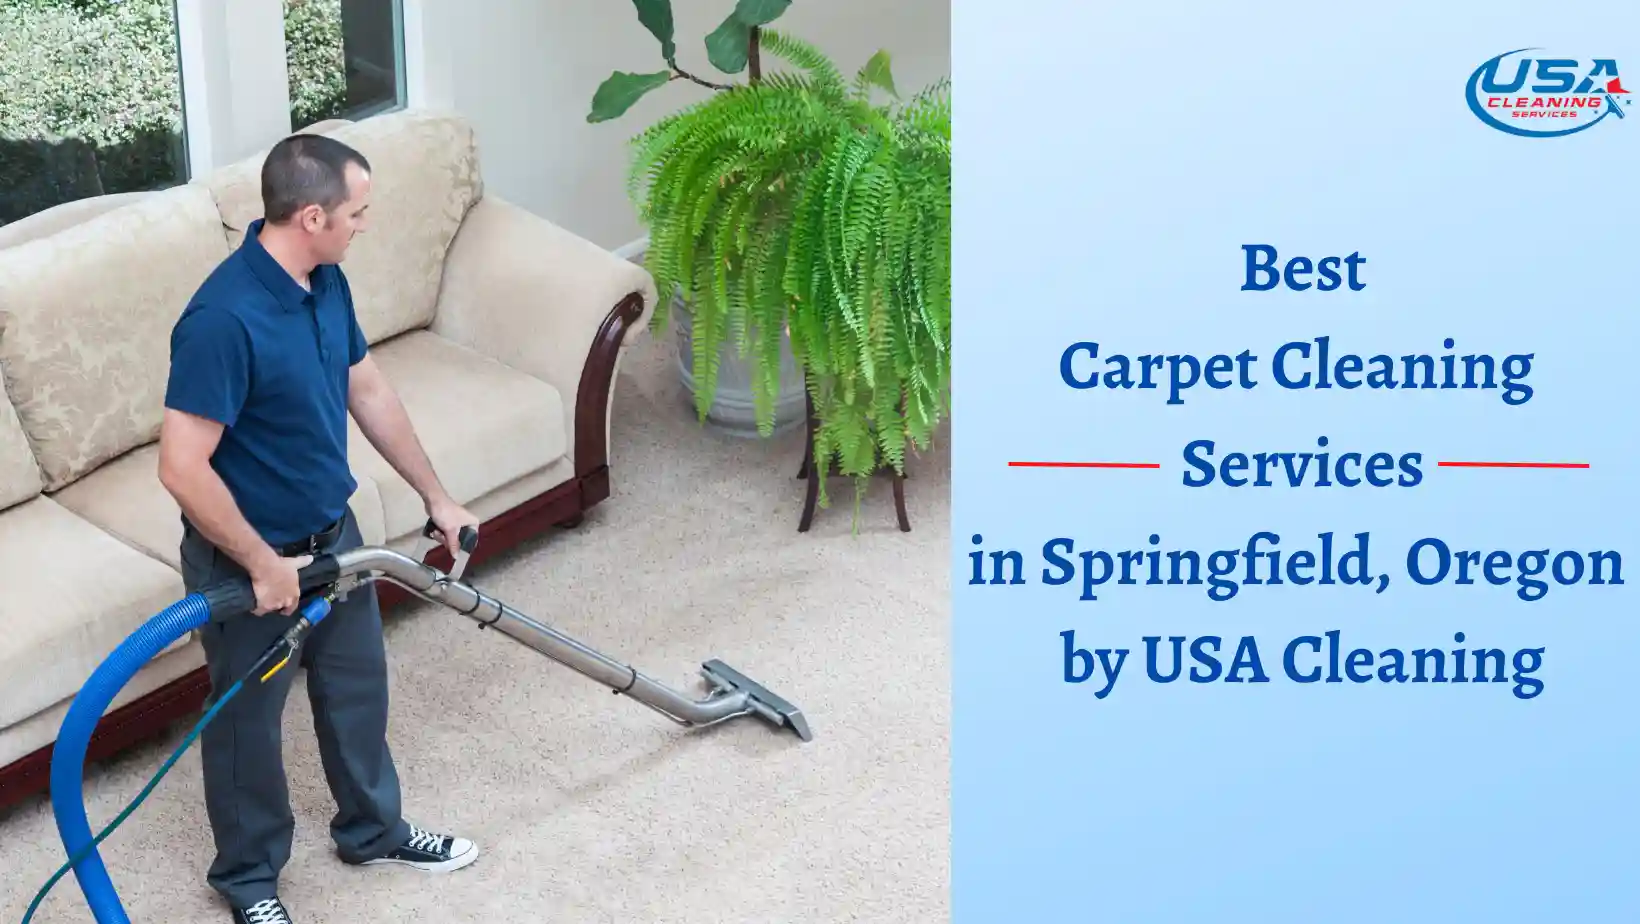 Best Carpet Cleaning Services in Springfield, Oregon by USA Cleaning